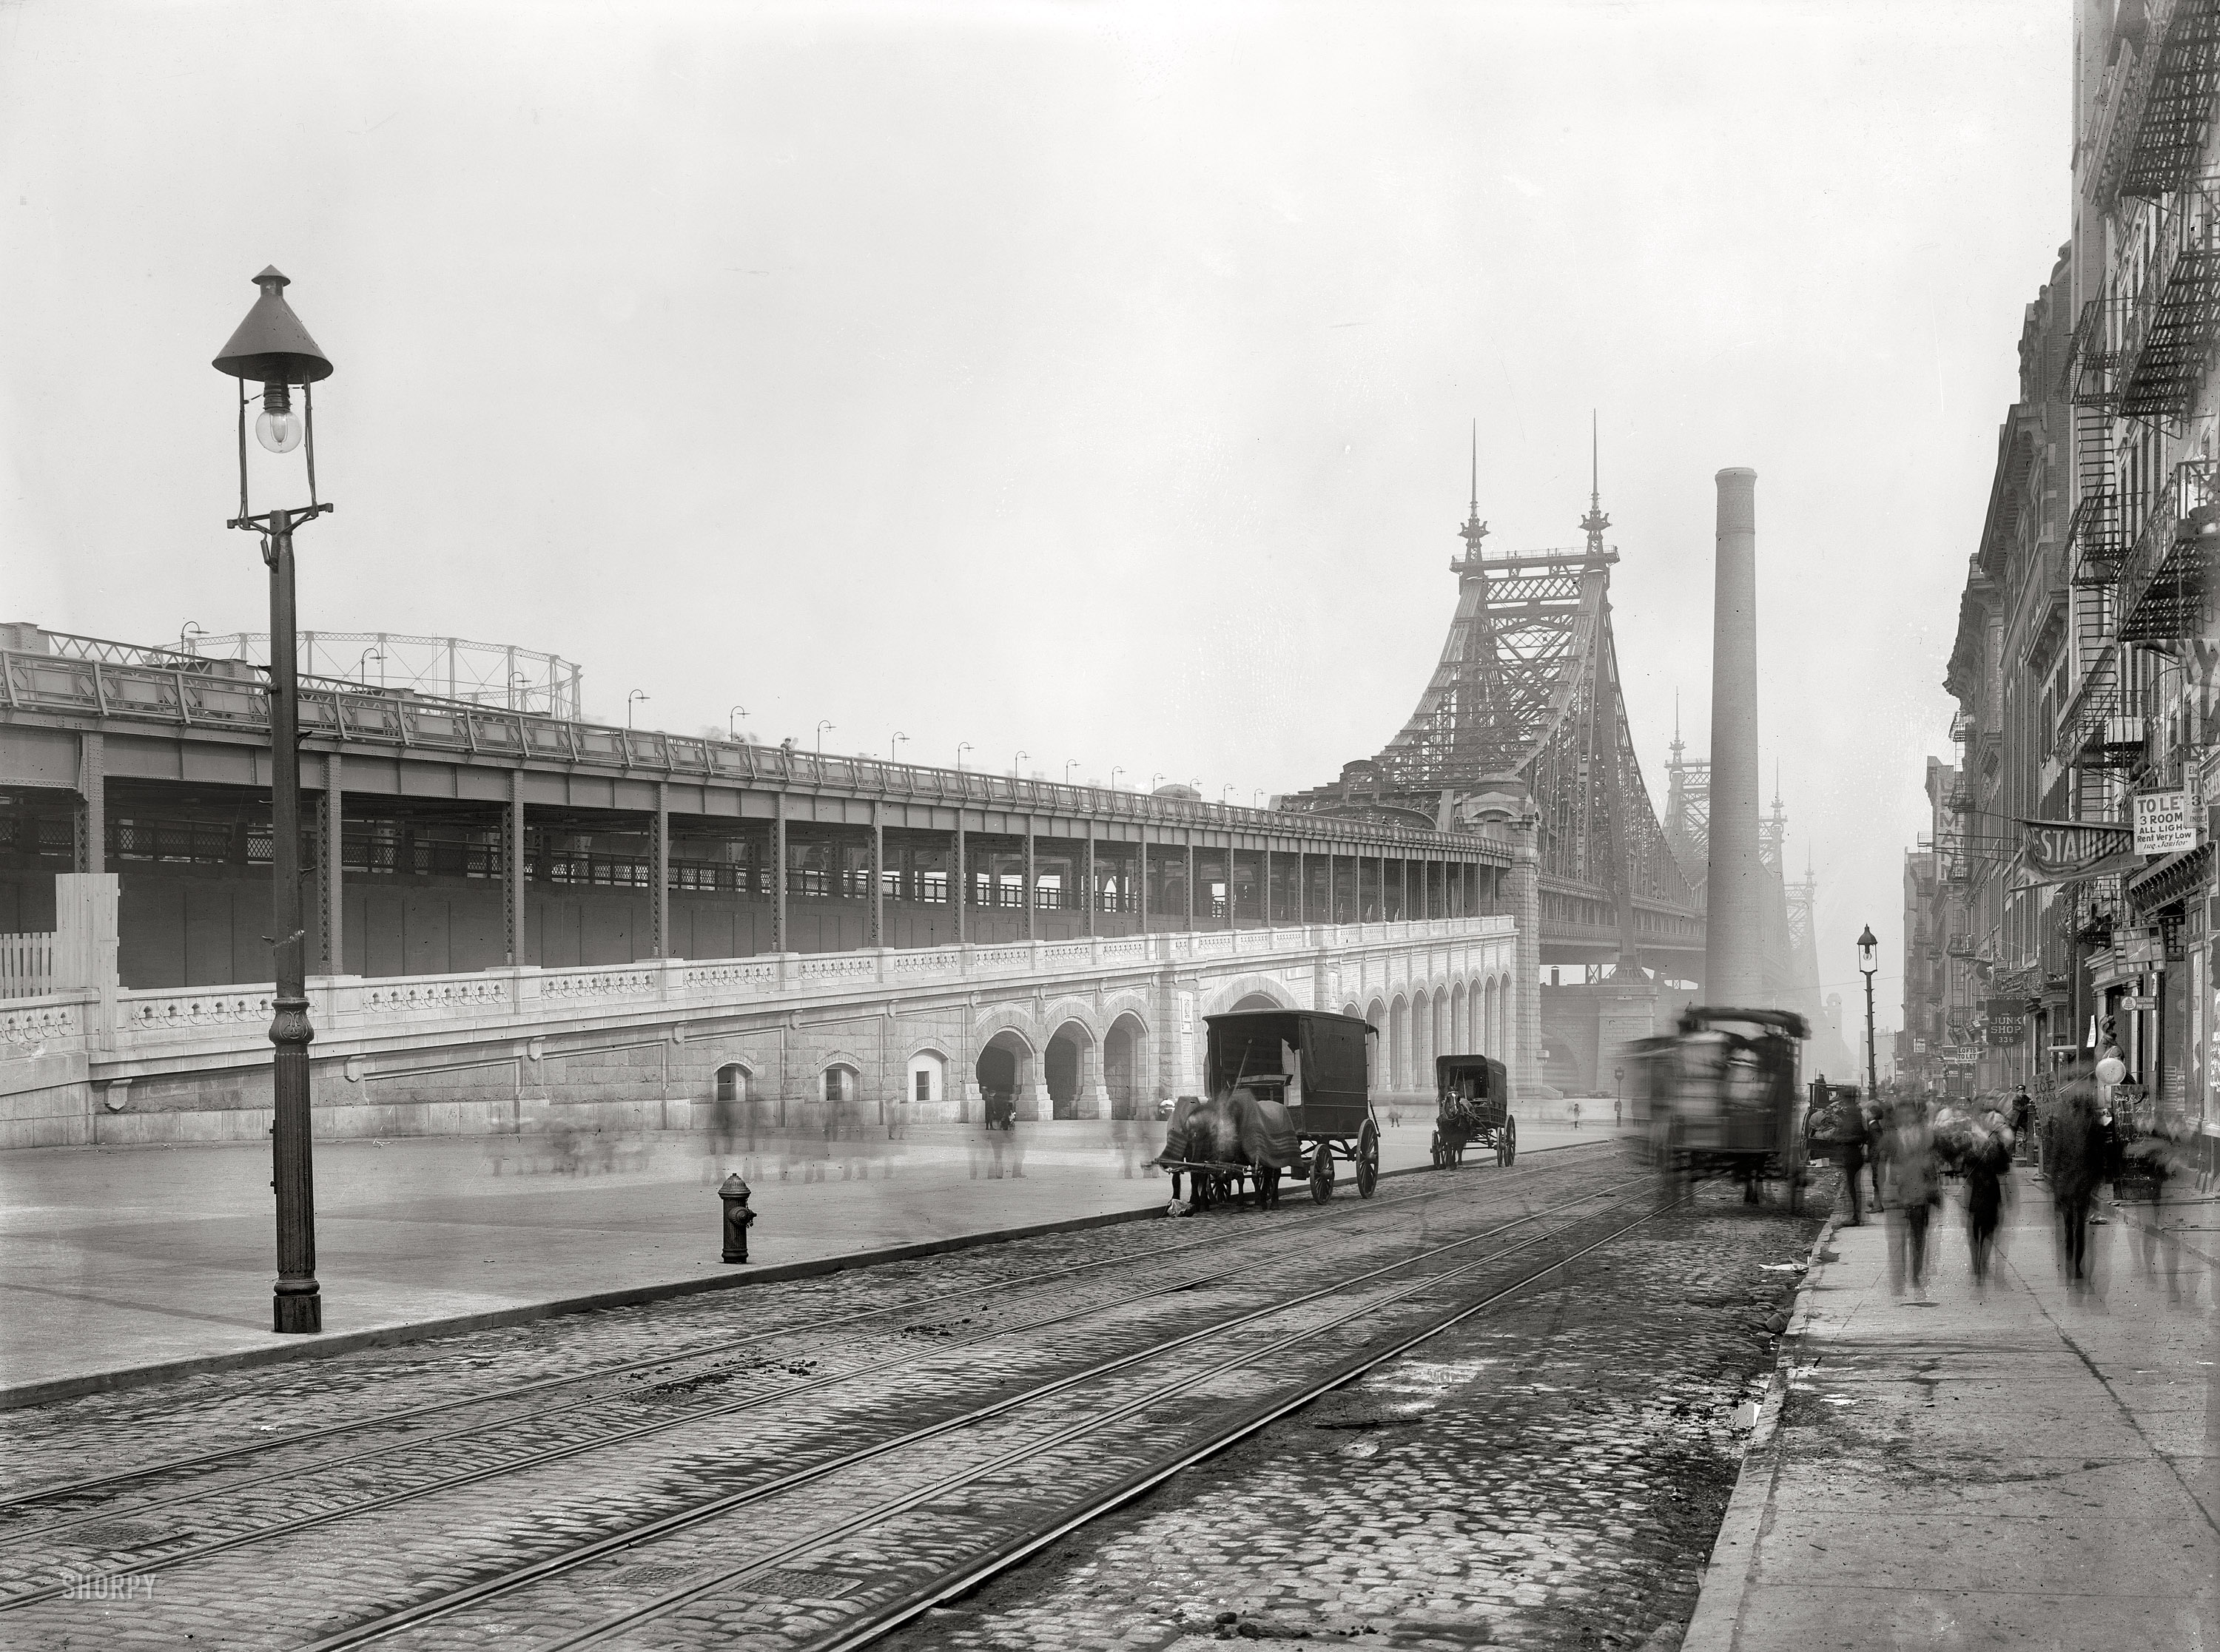 New York, 1909. The new Queensboro (59th Street) Bridge over the East River. 8x10 inch glass negative, George Grantham Bain Collection. View full size.